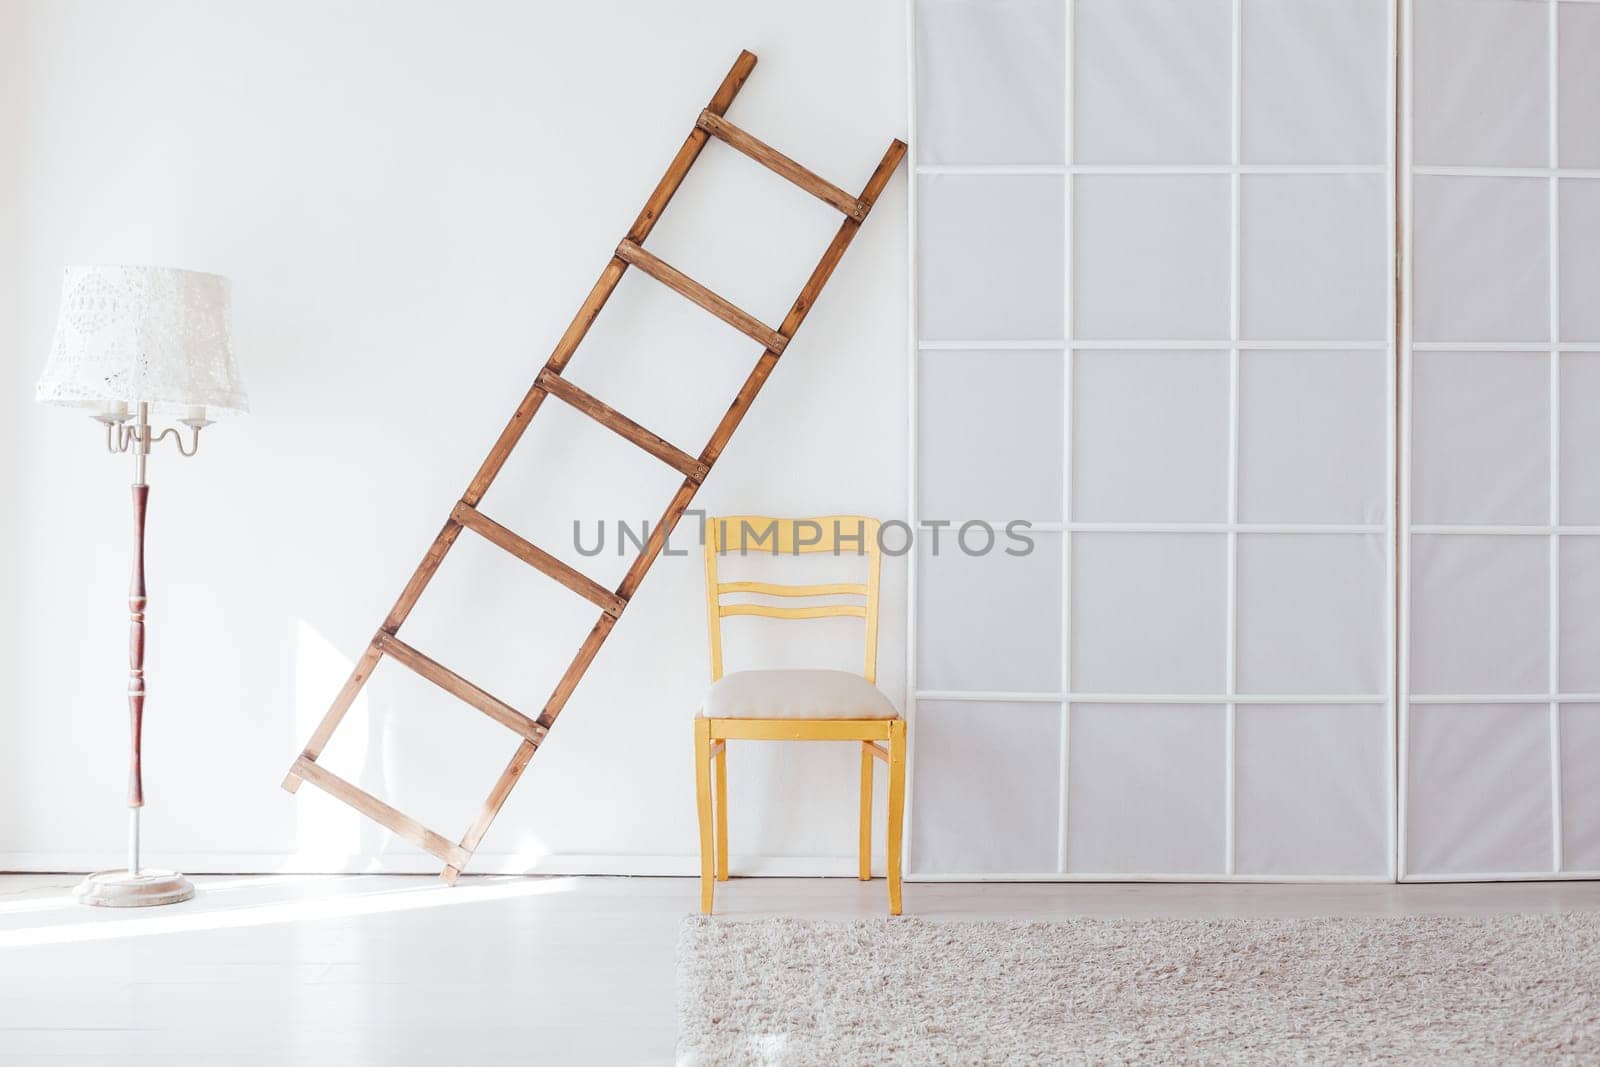 lamp staircase yellow chair in the interior of an empty white room by Simakov